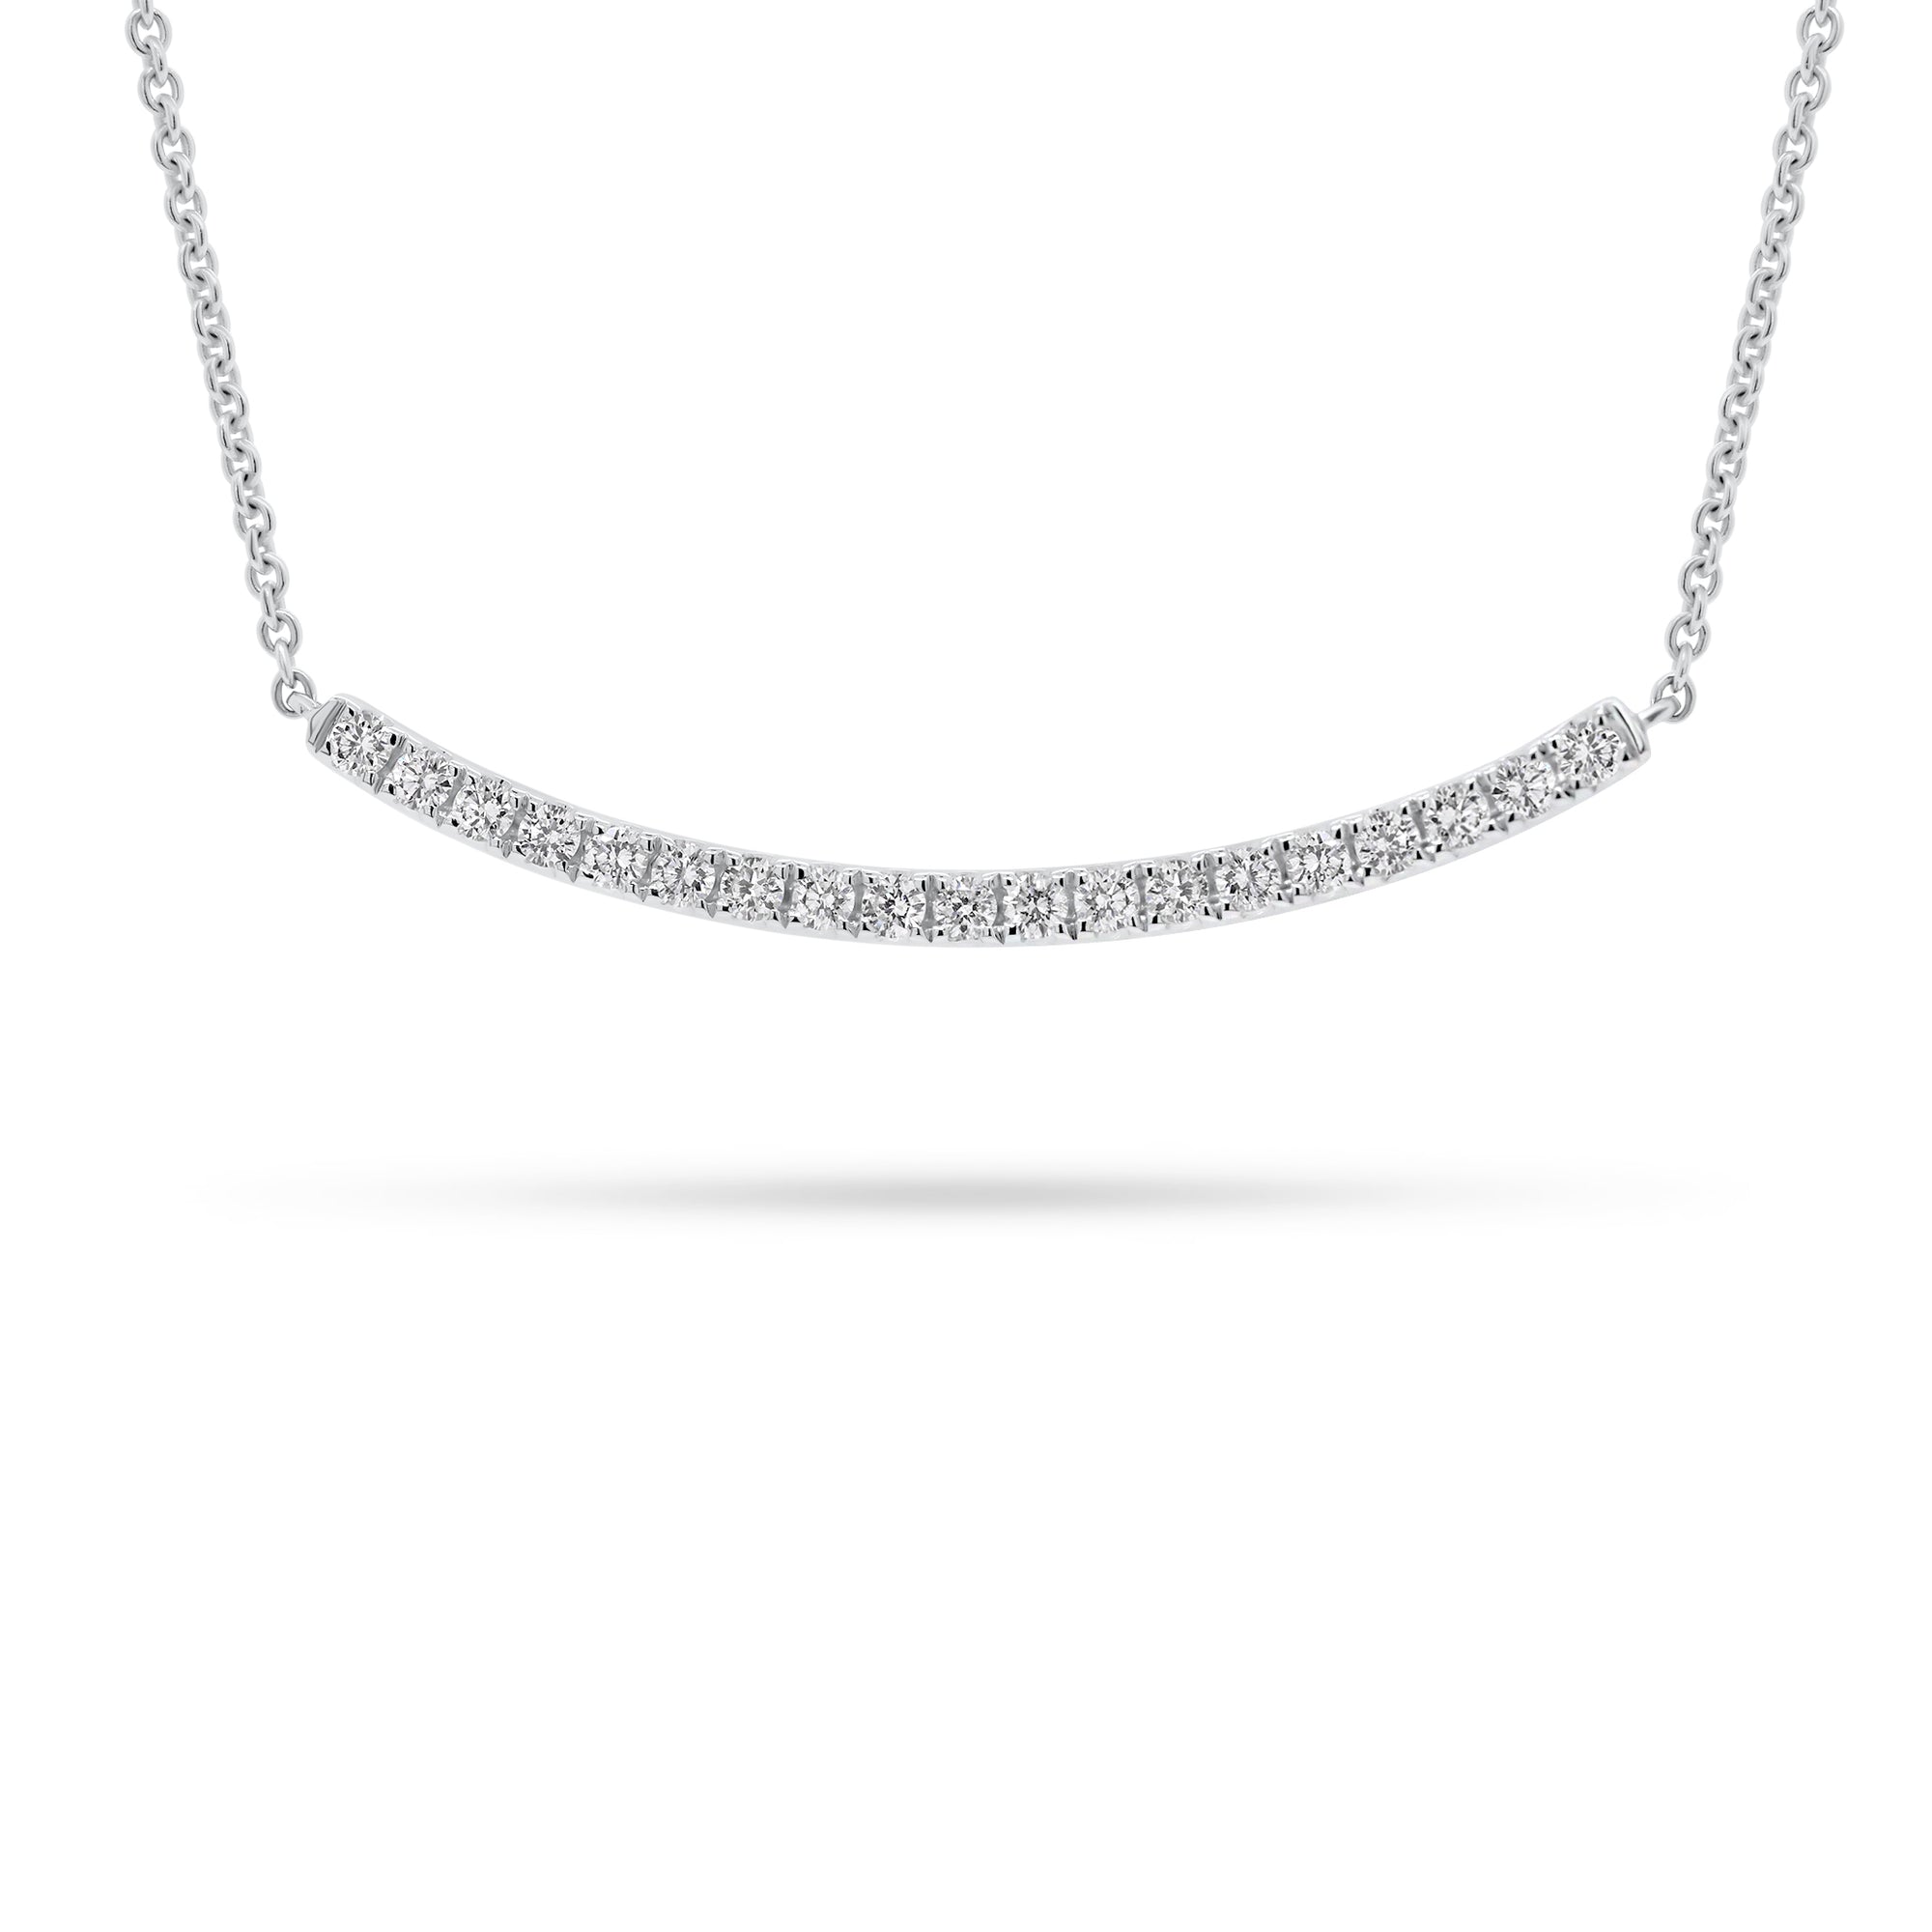 Diamond Curved Bar Necklace  - 18K gold weighing 4.12 grams  - 19 round diamonds totaling 0.40 carats